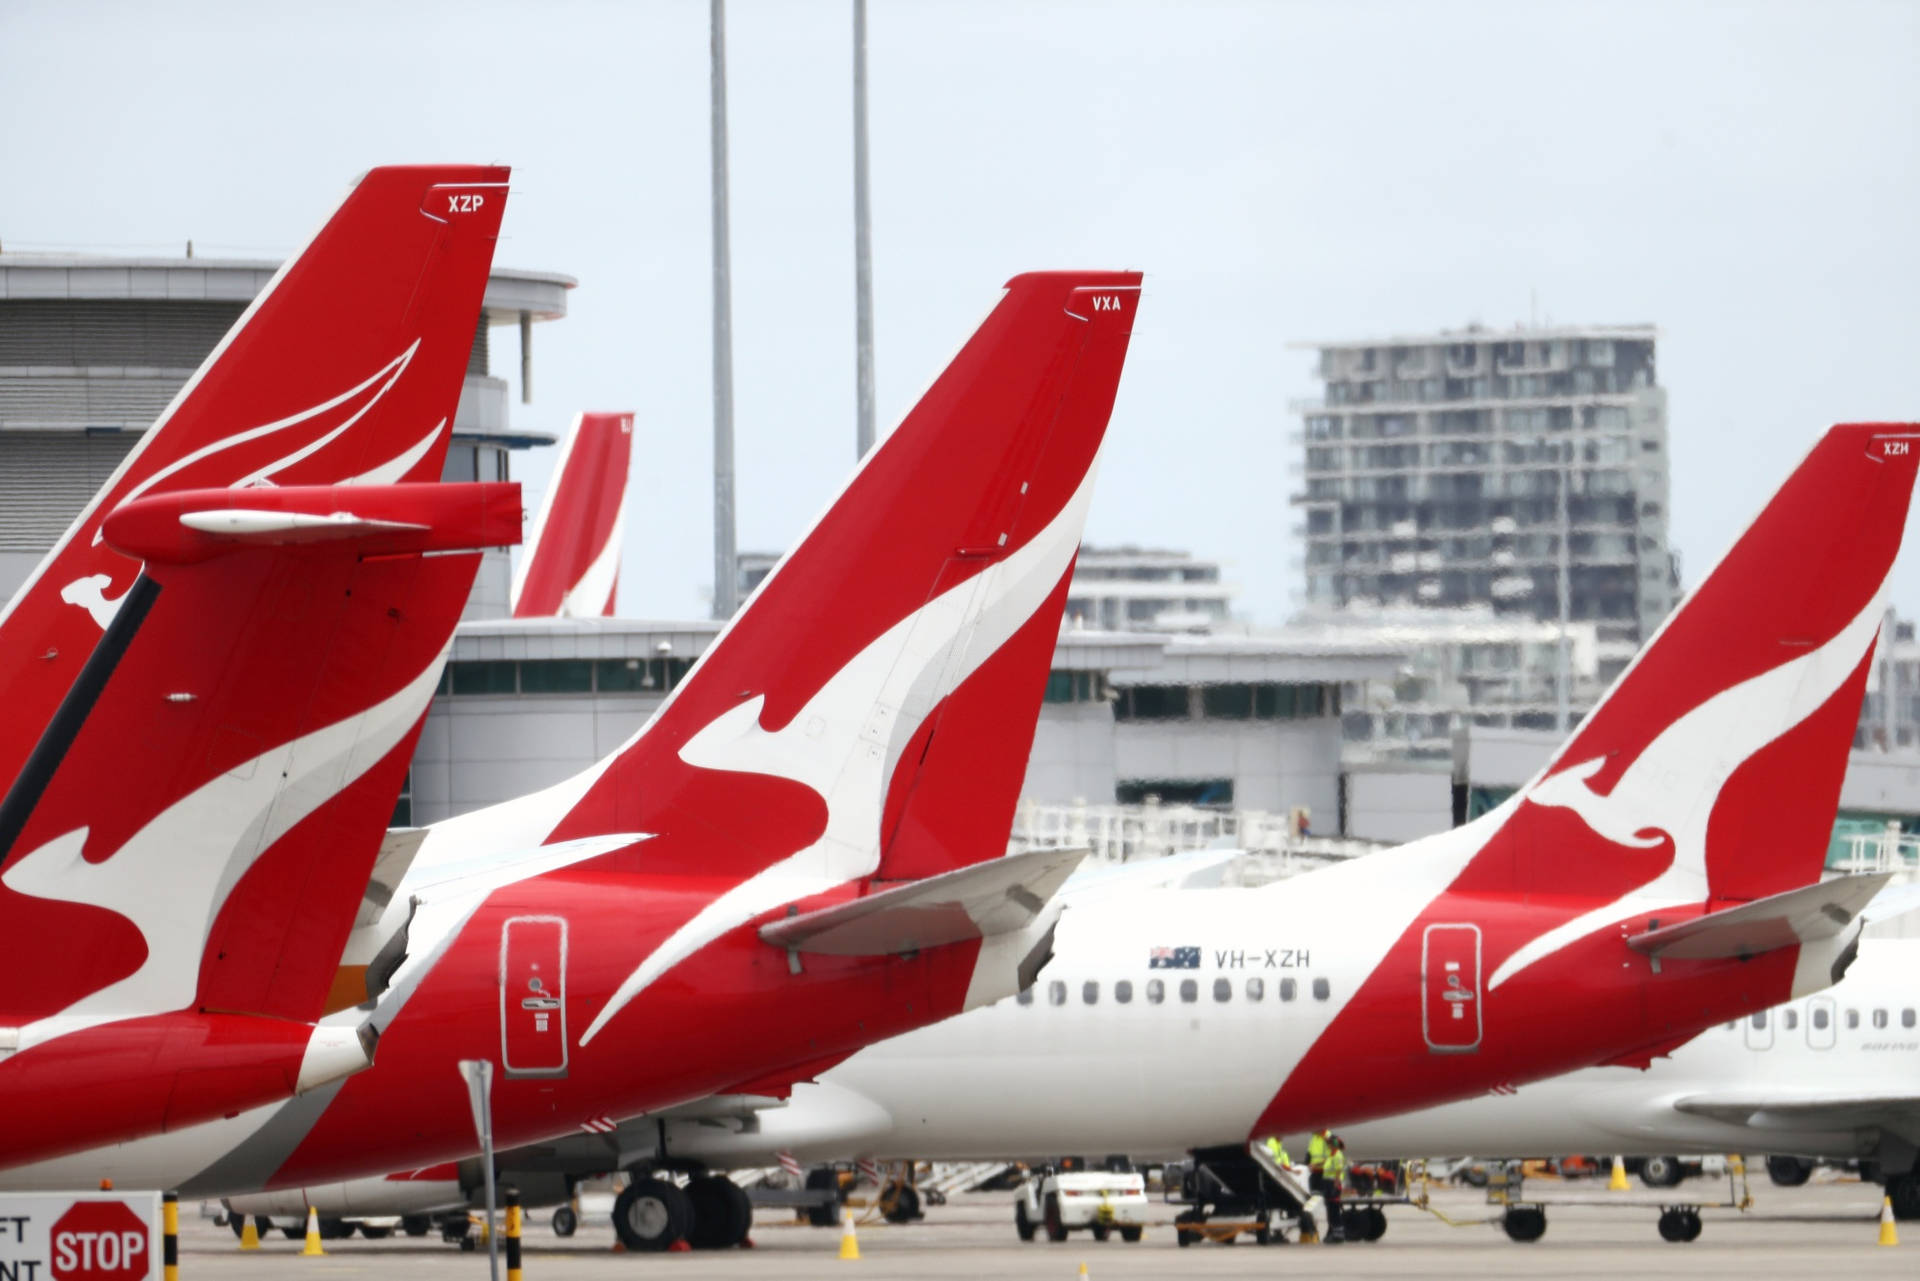 Qantas Airbuses Red Empennage Wallpaper